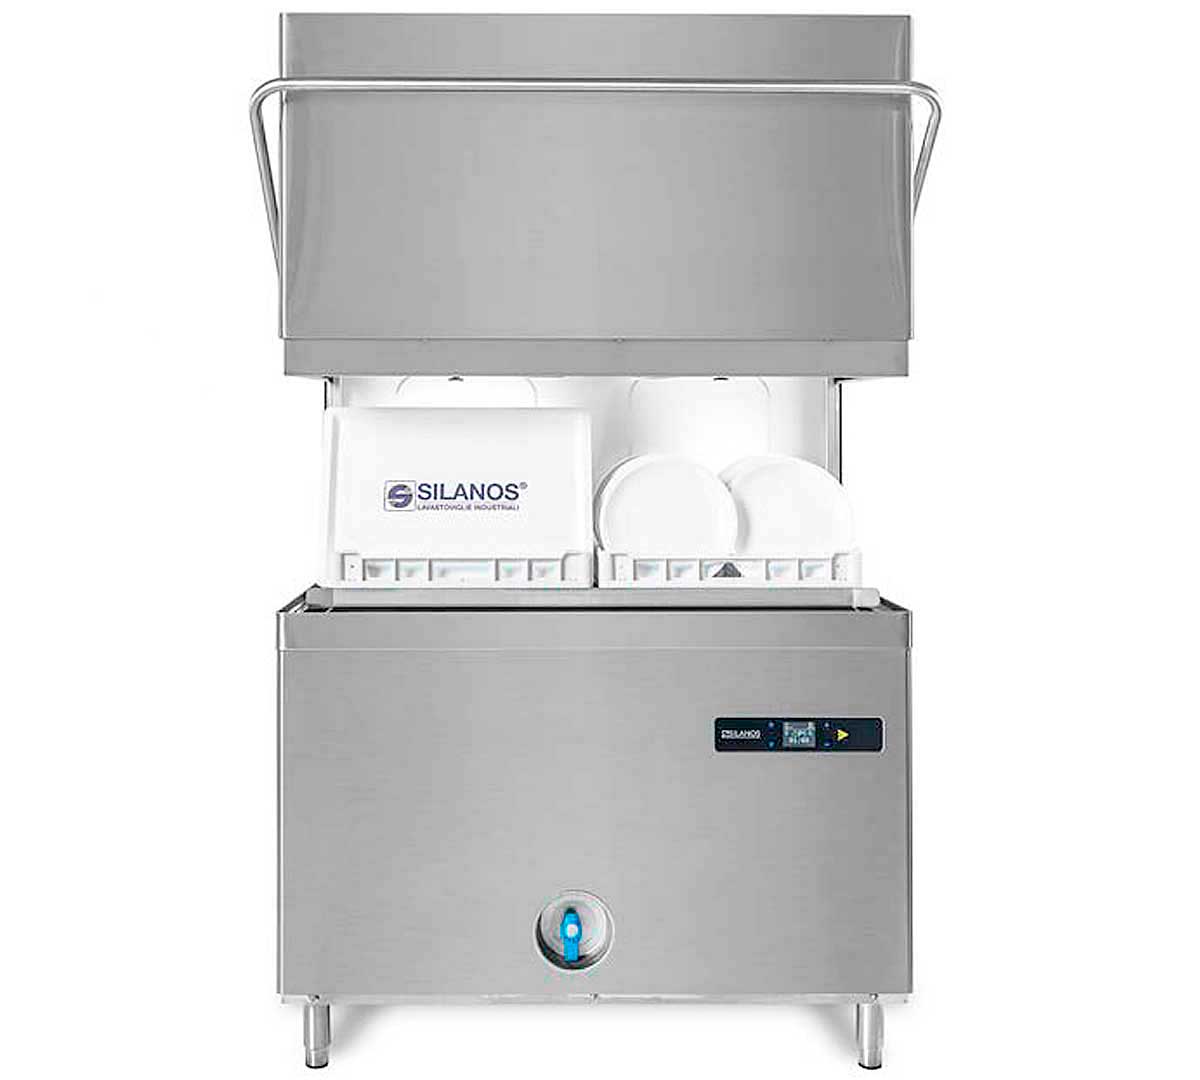 DOUBLE DOME DISHWASHER SILANOS N-1300 DOUBLE EVO